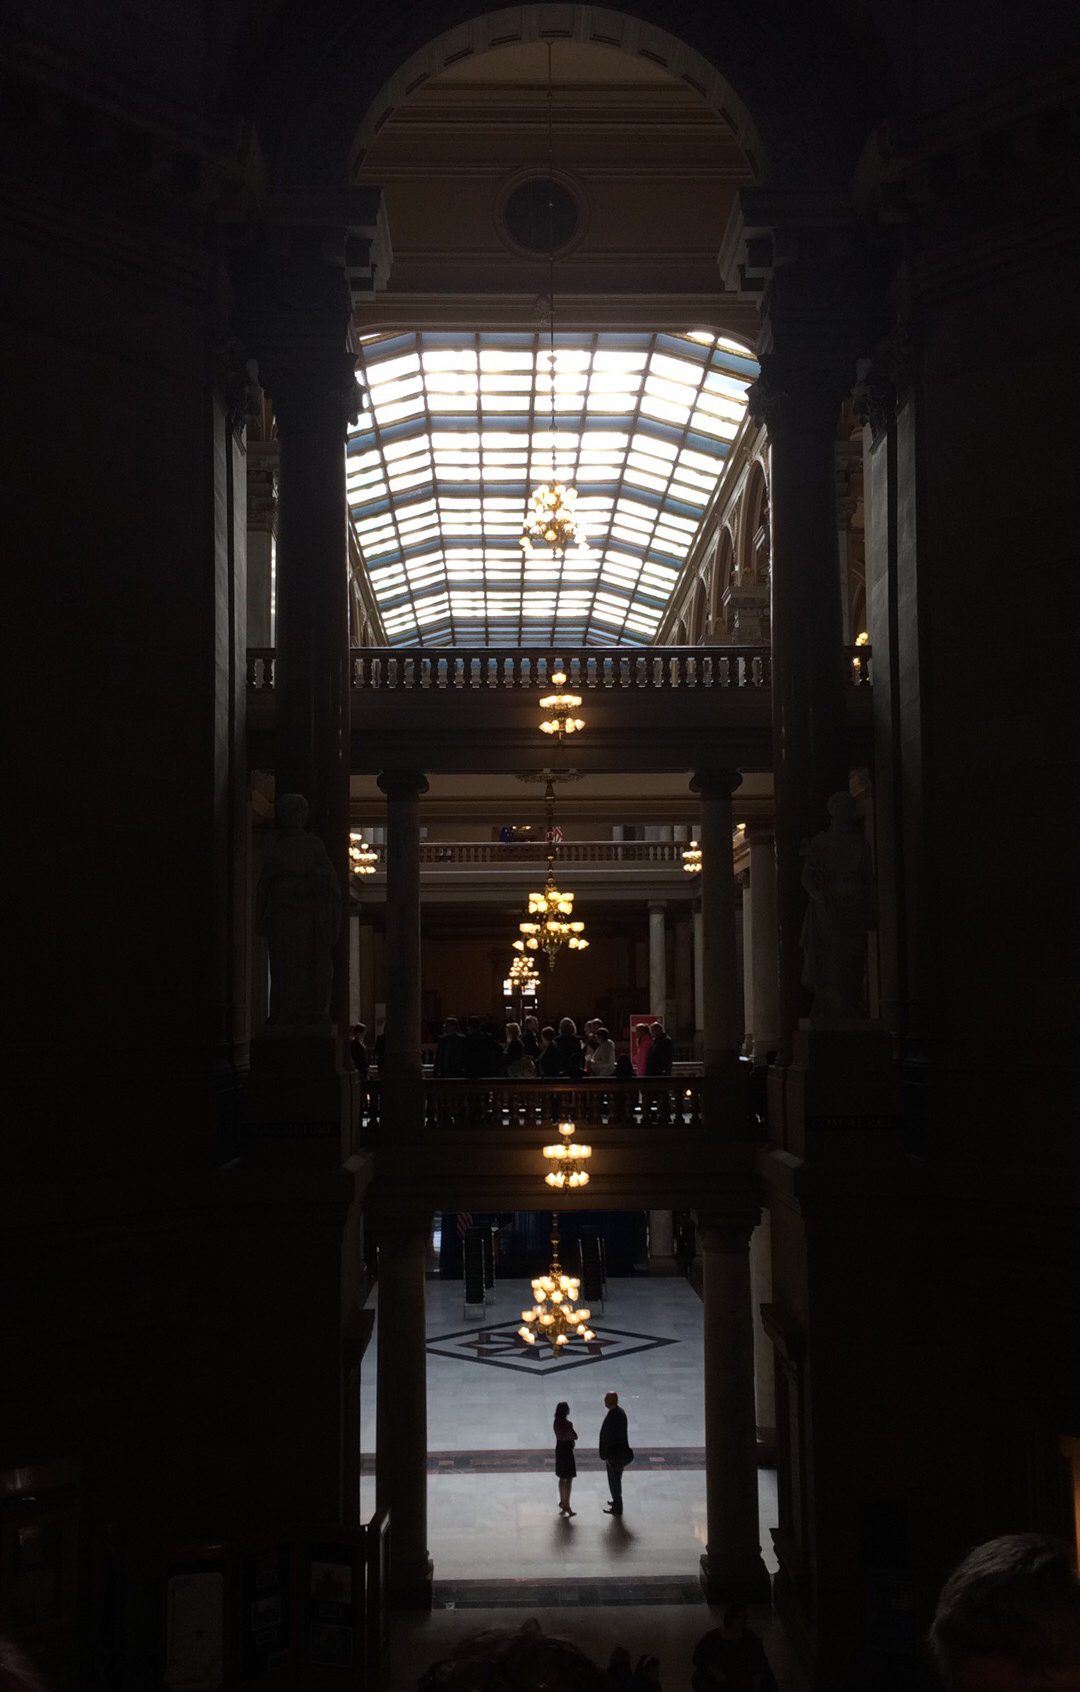 A man and woman are silhouetted at the bottom of the grand staircase at the Indiana State House.